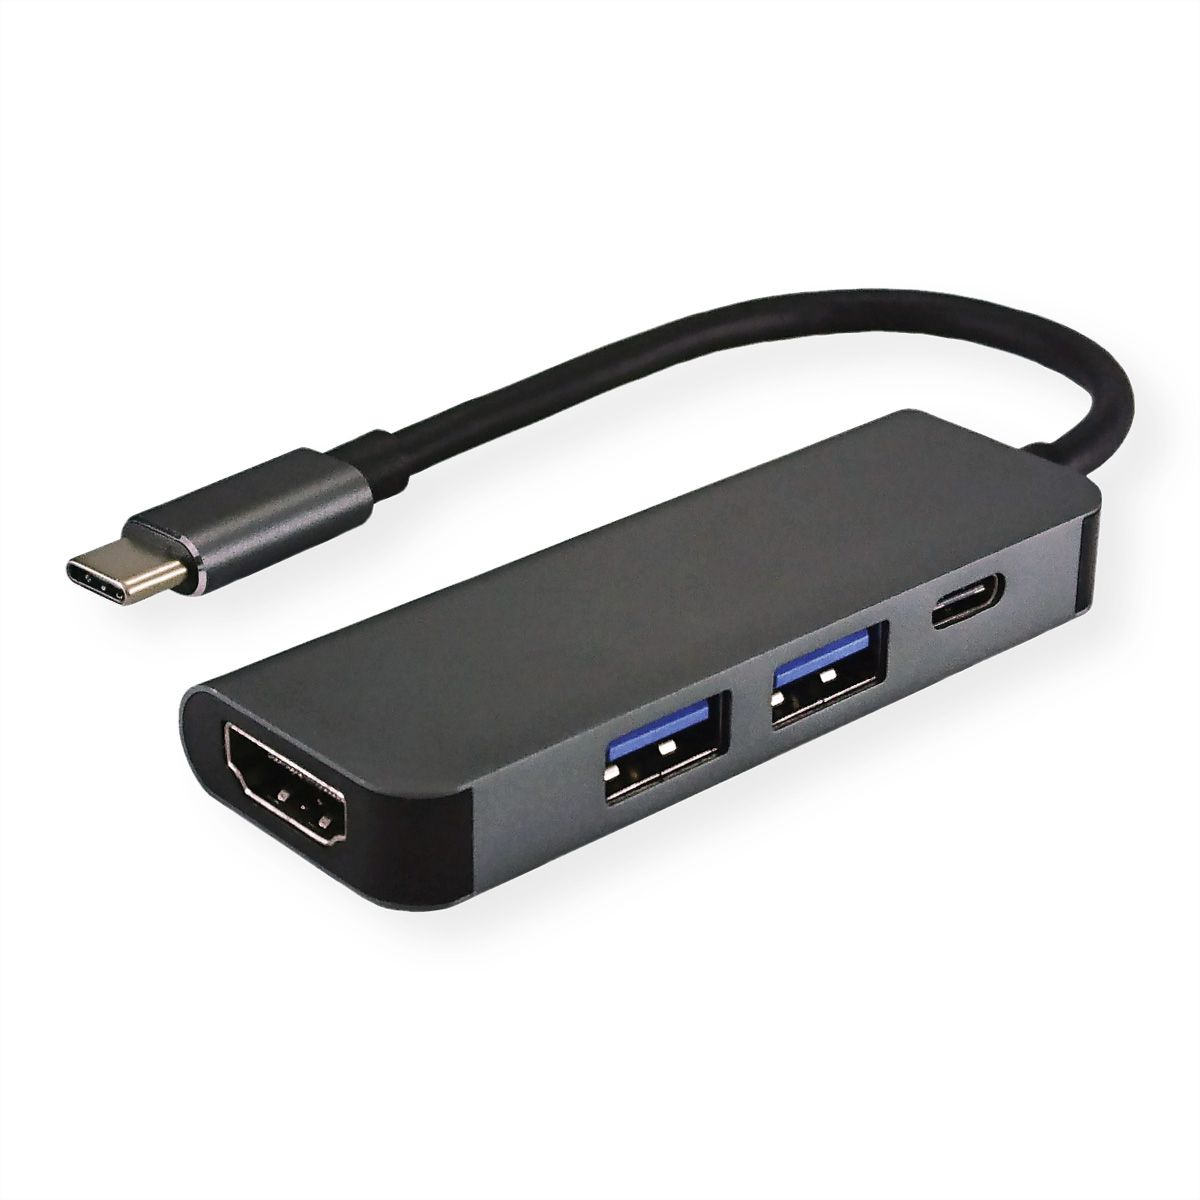 USB3.1 Type-C Multi-port Adapter USB3.1 Type-C to High-Definition Multimedia Interface Female+USB3.0 Video Conversion Cable 